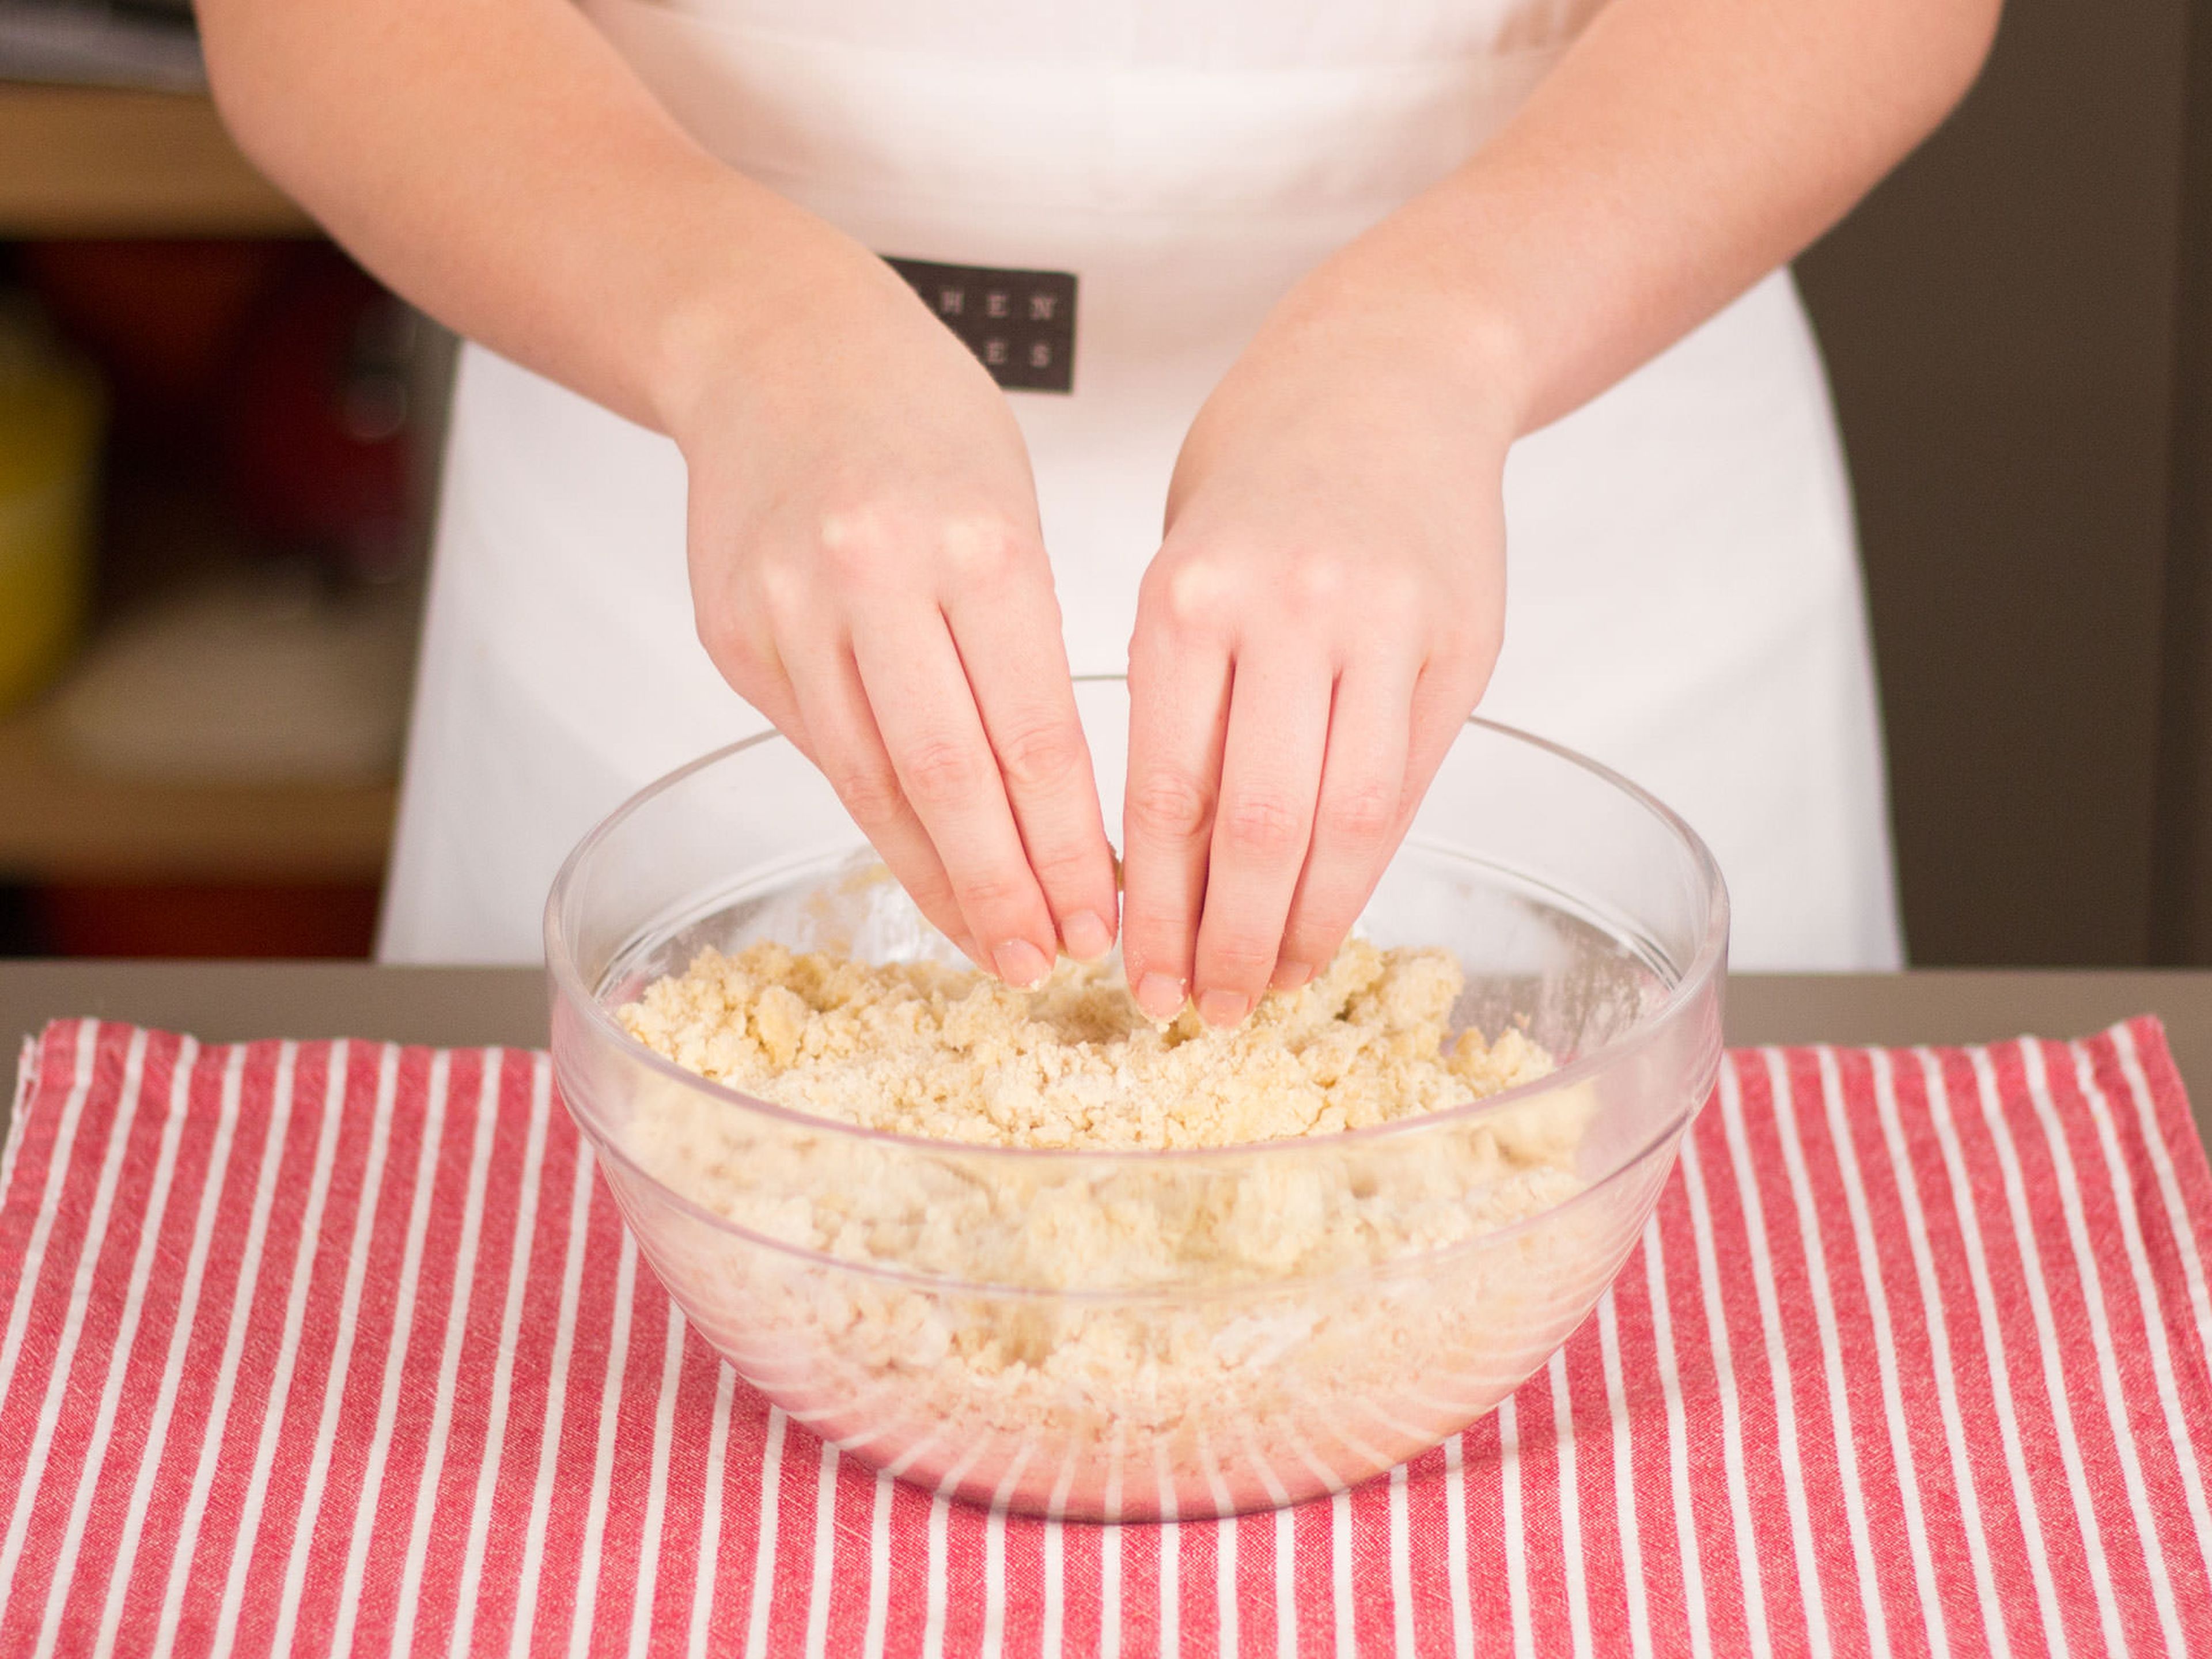 In a large bowl, mix remaining butter, sugar, flour, and vanilla sugar into coarse crumbles with your fingers.